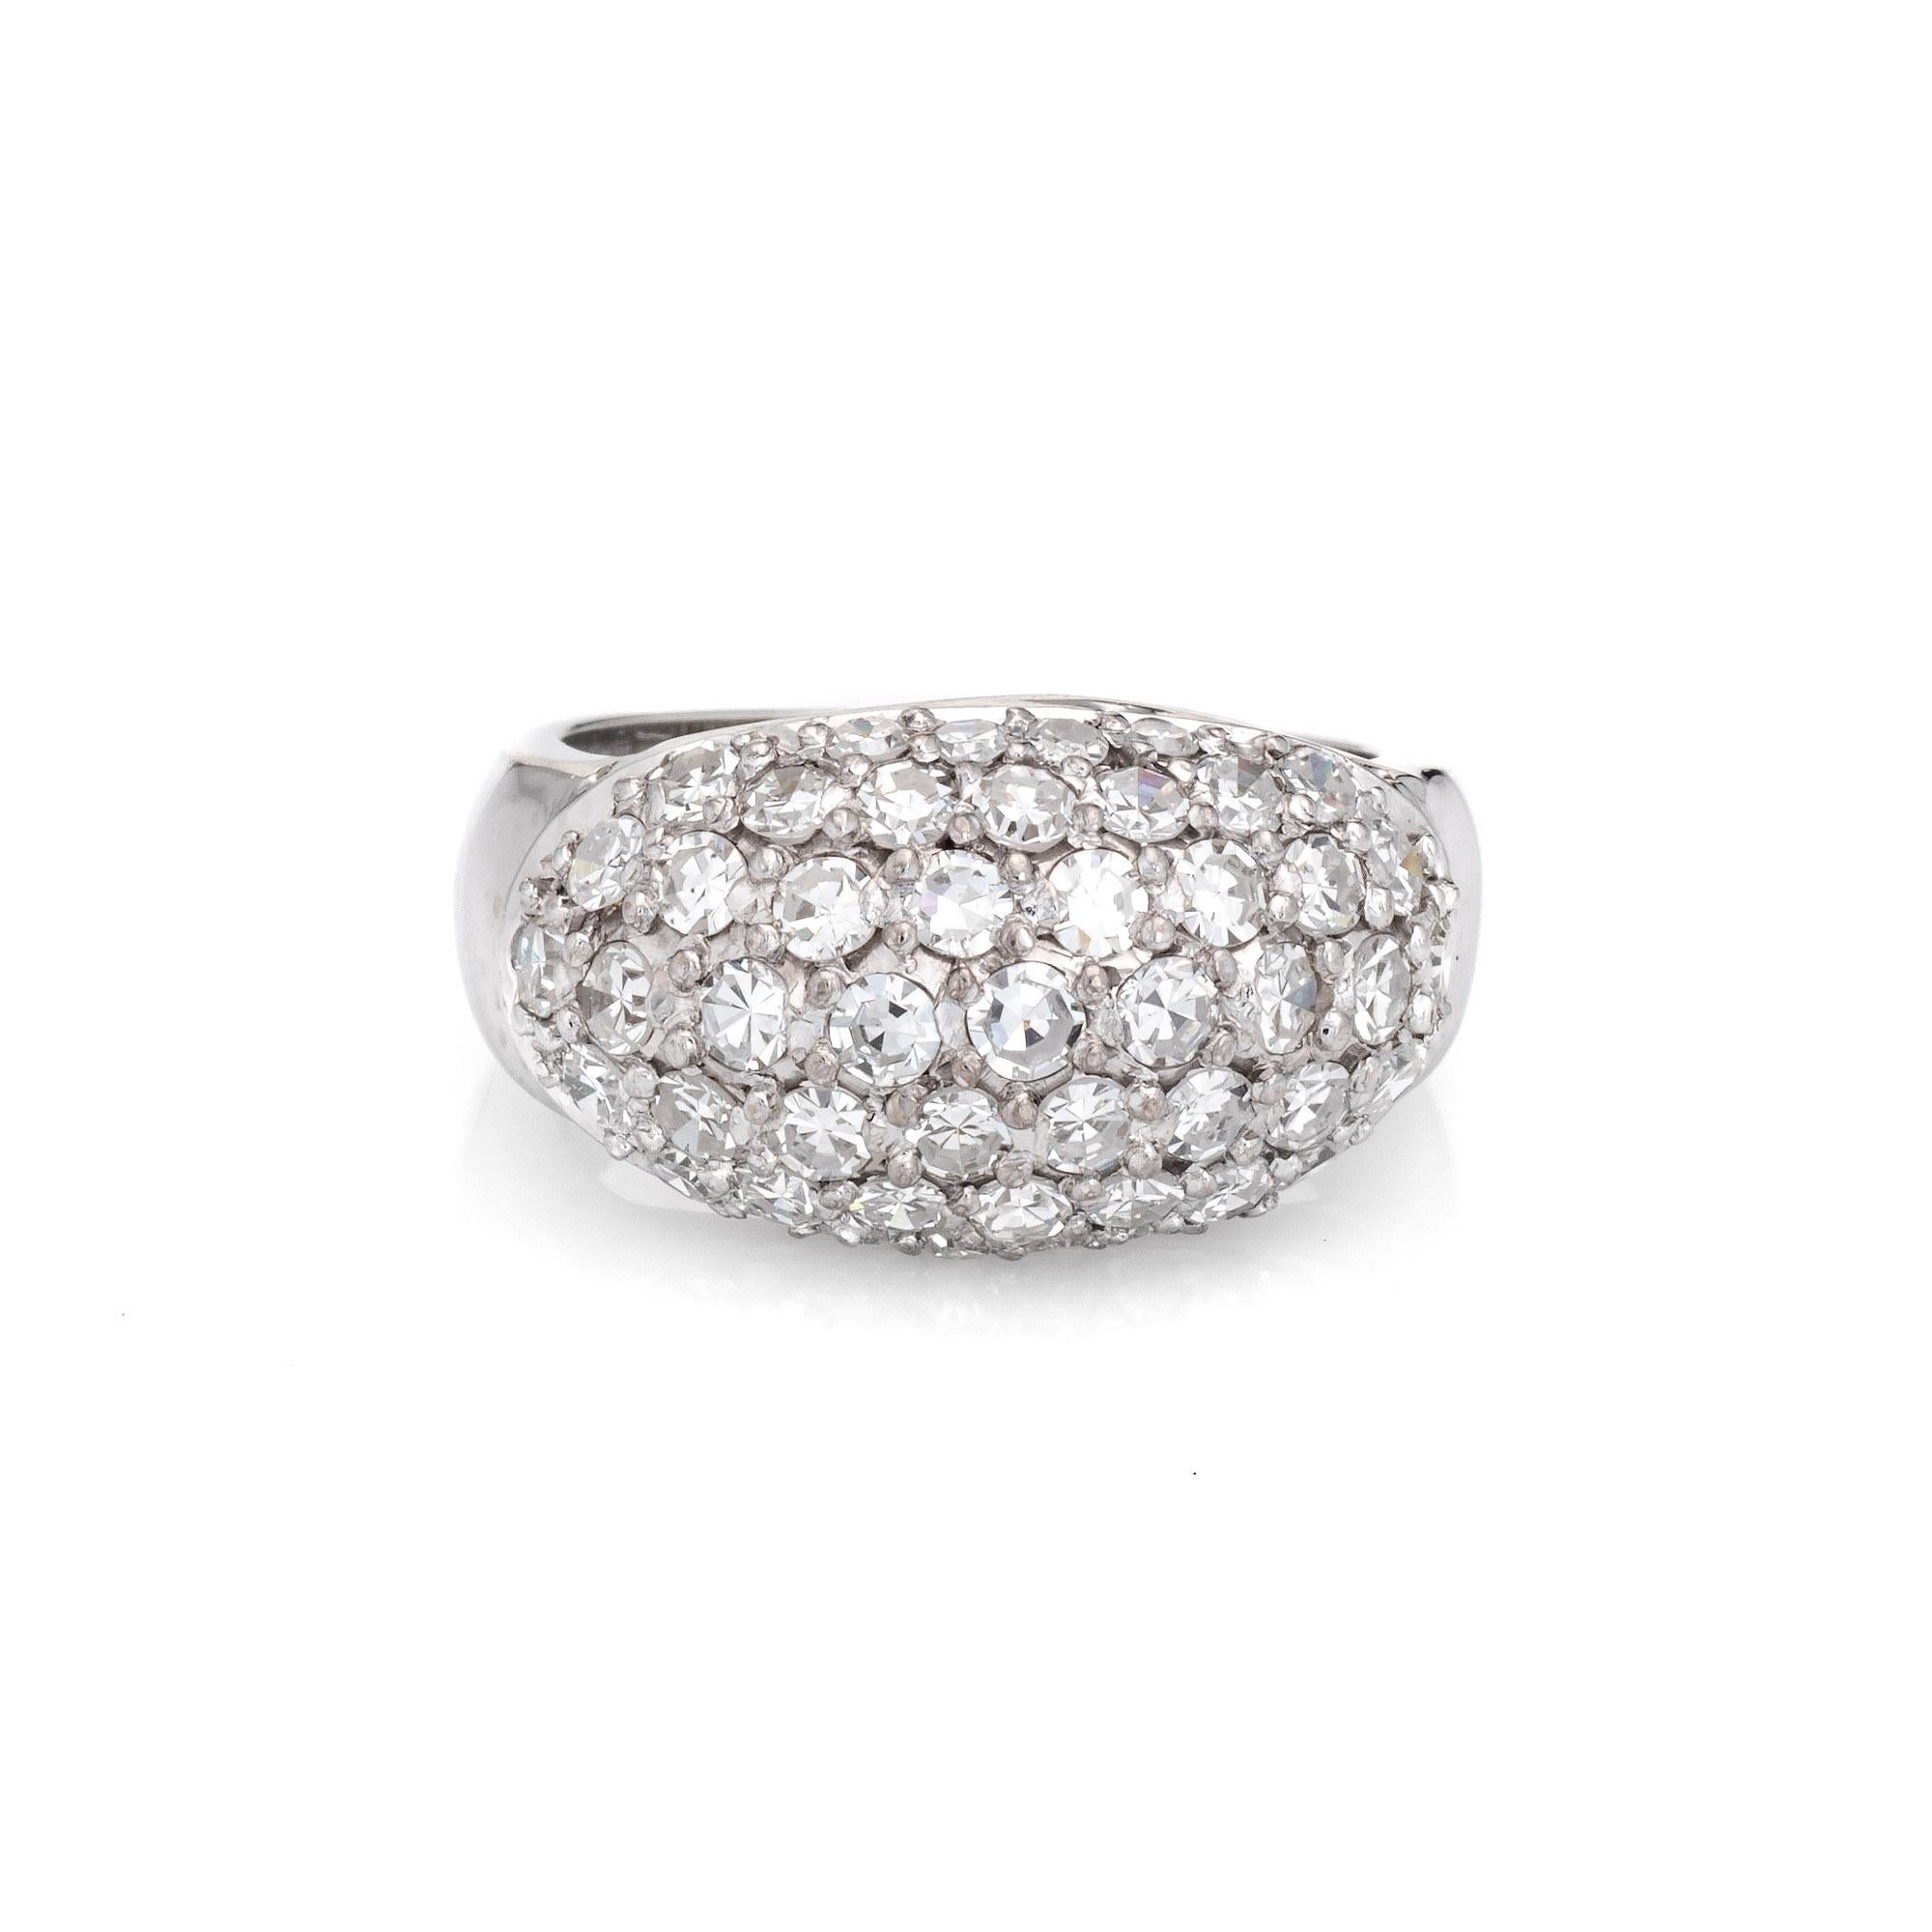 Stylish vintage pave diamond dome ring crafted in 18 karat white gold. 

Single cut diamonds total an estimated 1.50 carats (estimated at G-H color and VS1-2 clarity). 

The domed ring features 7 rows of diamonds, pave set to allow for maximum